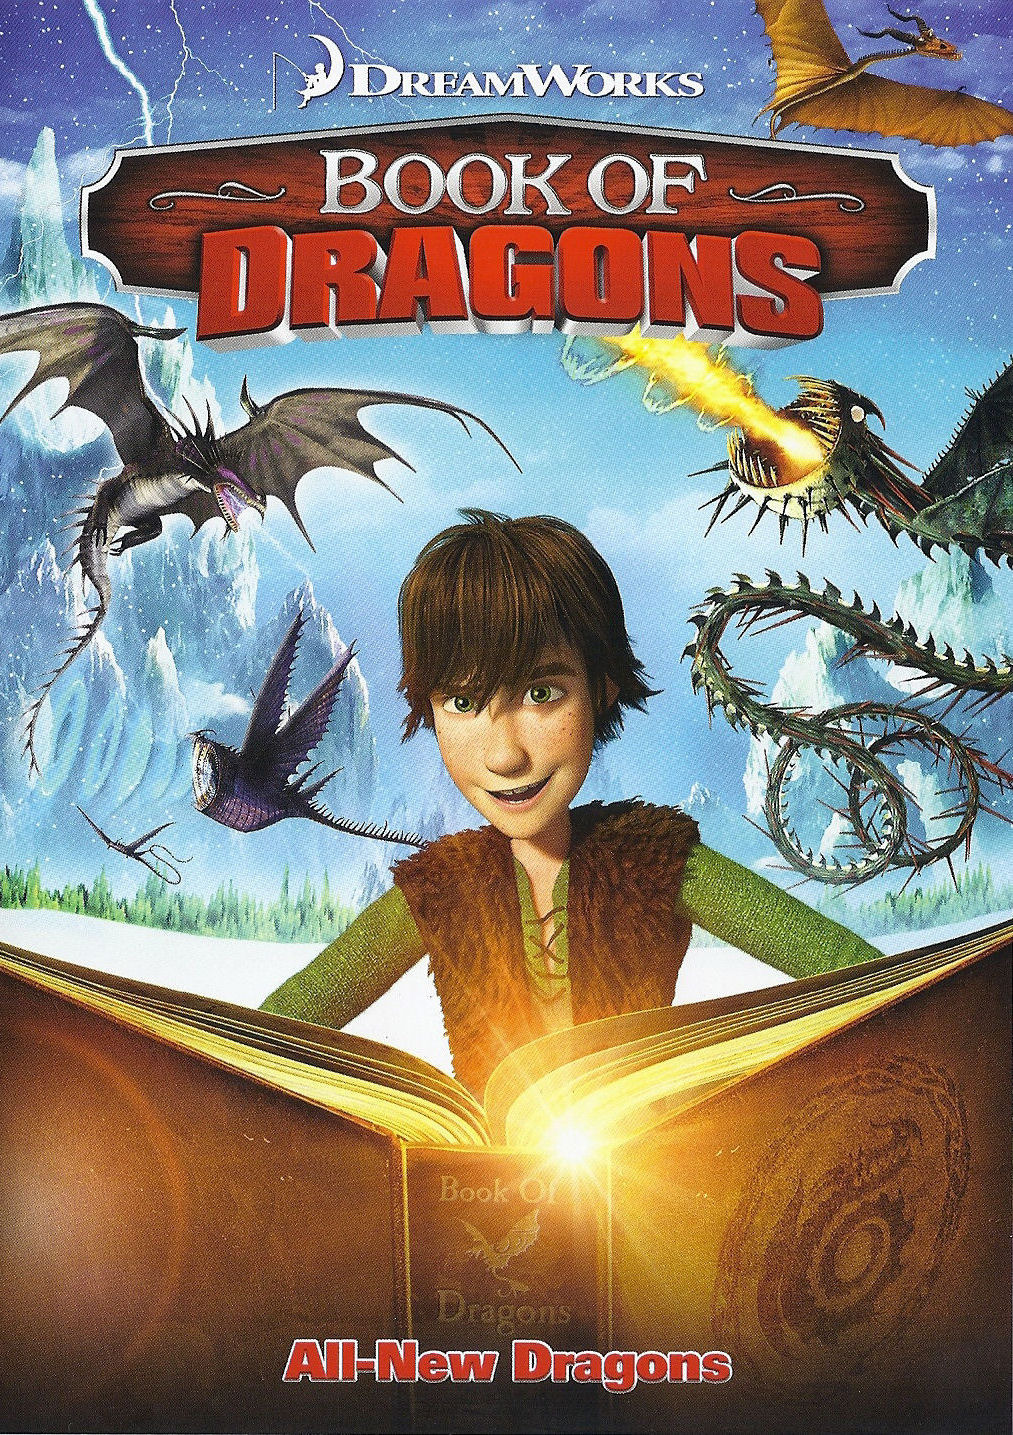 What are some of the games from the movie How to Train a Dragon?